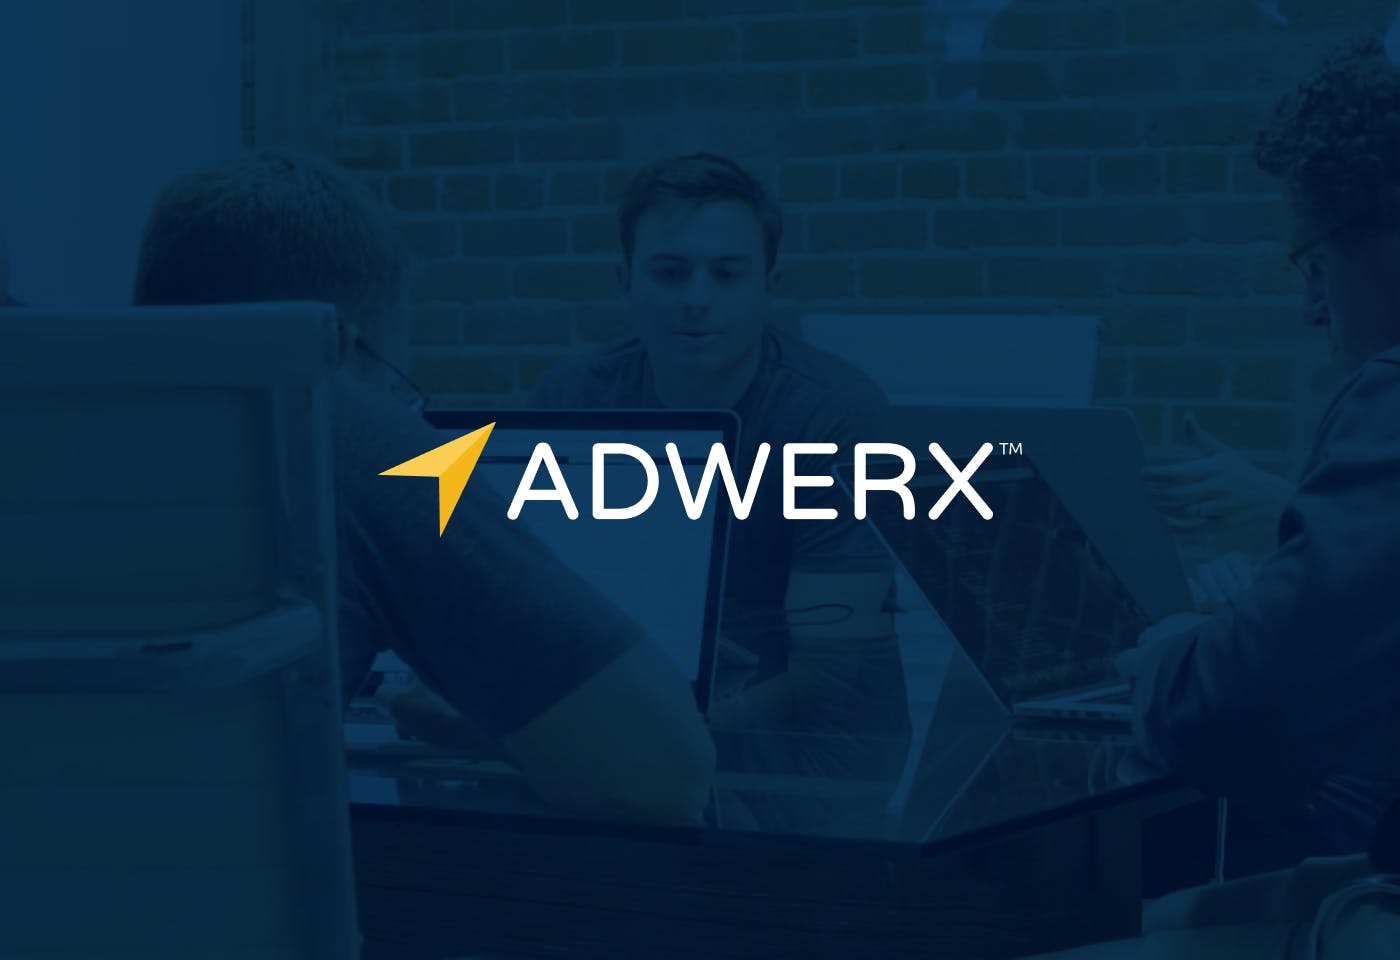 The Adwerx logo on a dark background with a photo of people sitting at a conference room table behind the logo.